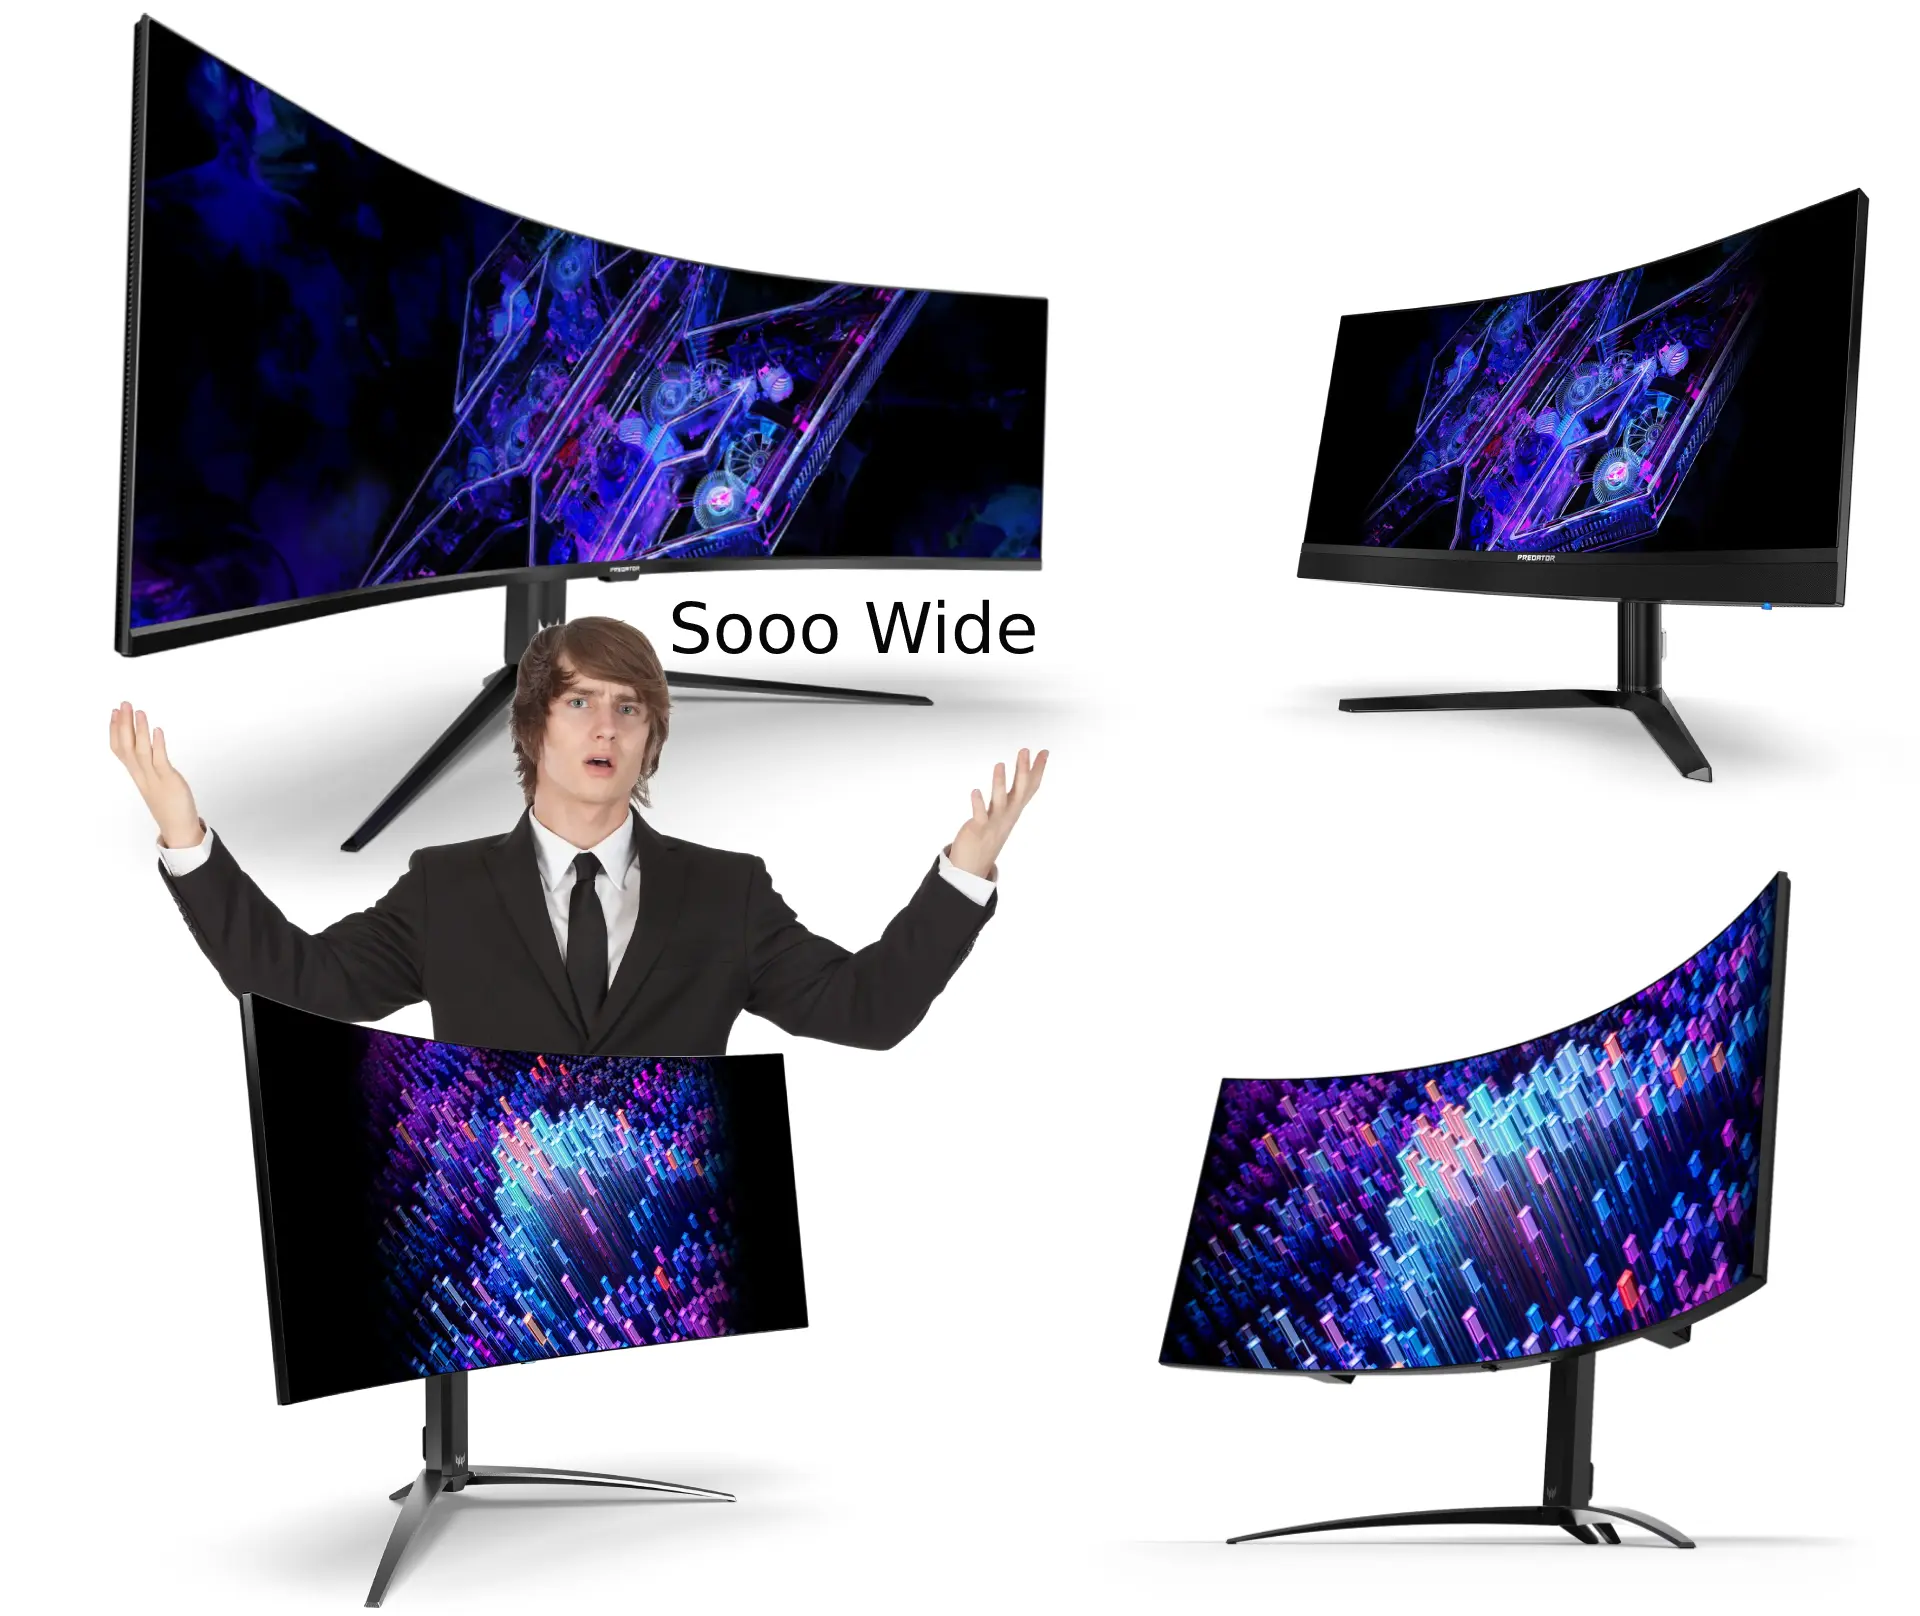 acer-goes-sooo-wideee-launches-new-gaming-pc-monitors-including-a-57-inch-curved-model